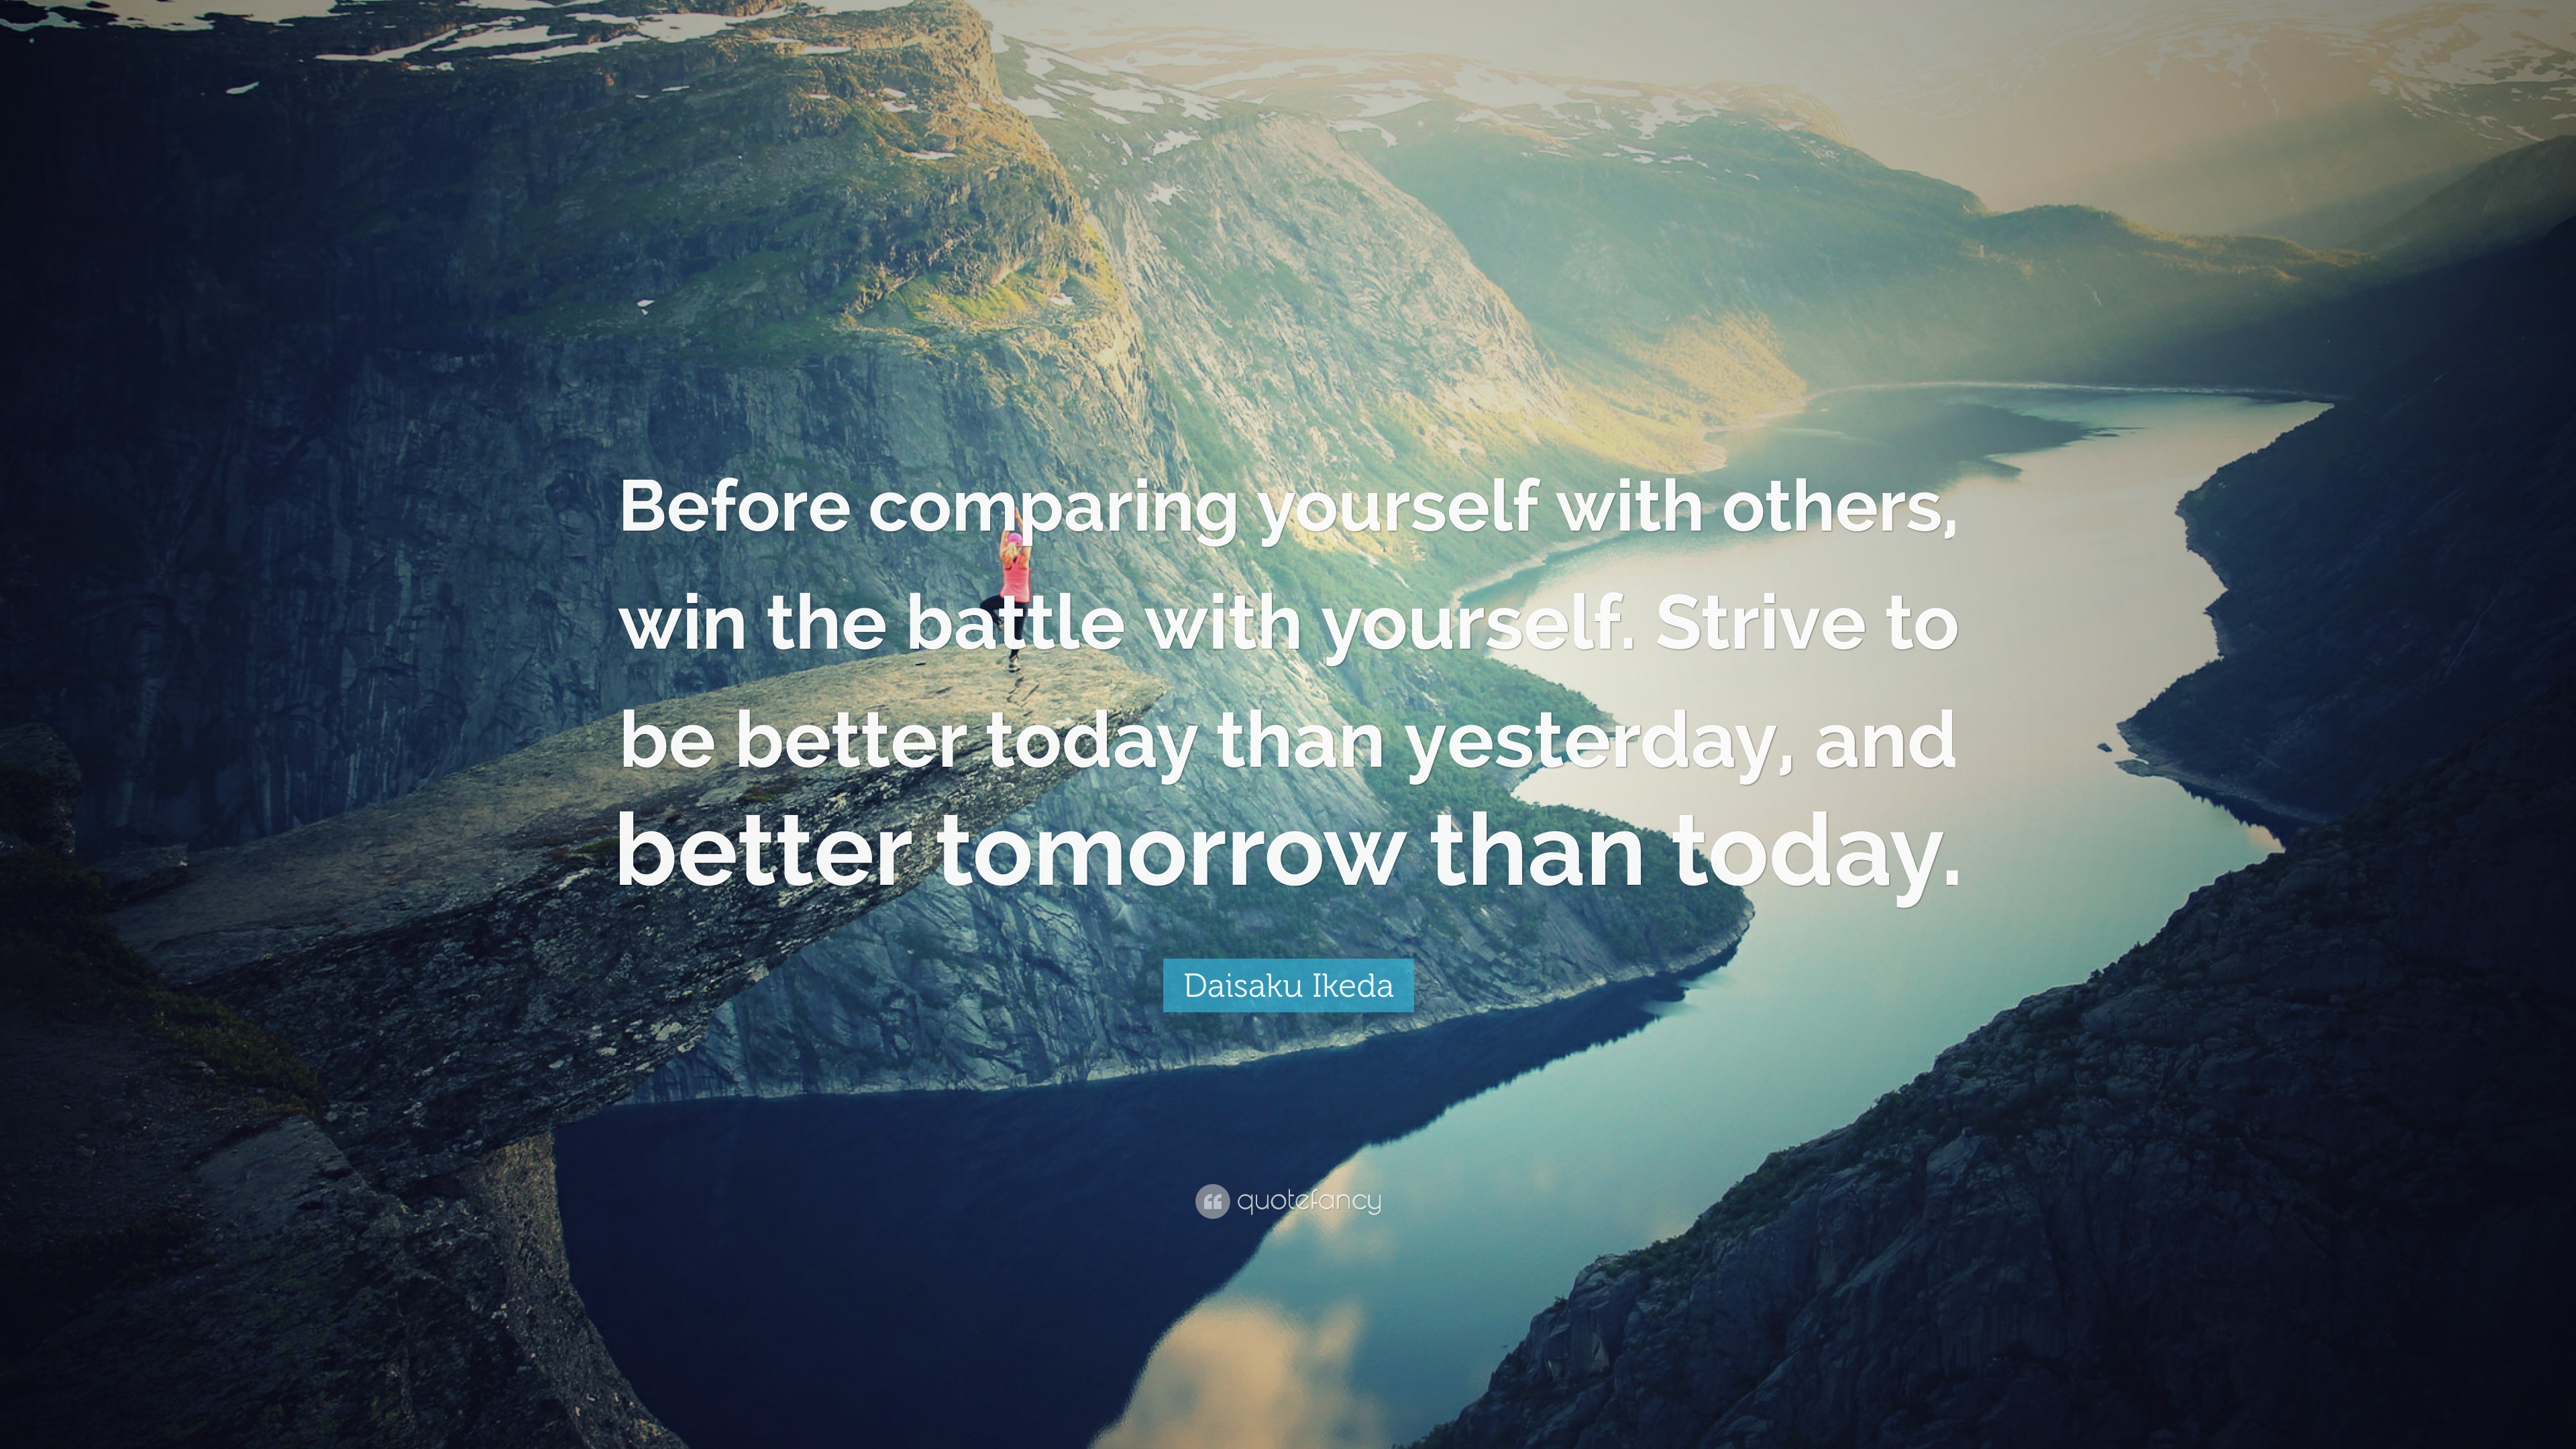 Daisaku Ikeda Quote: “Before comparing yourself with others, win the ...